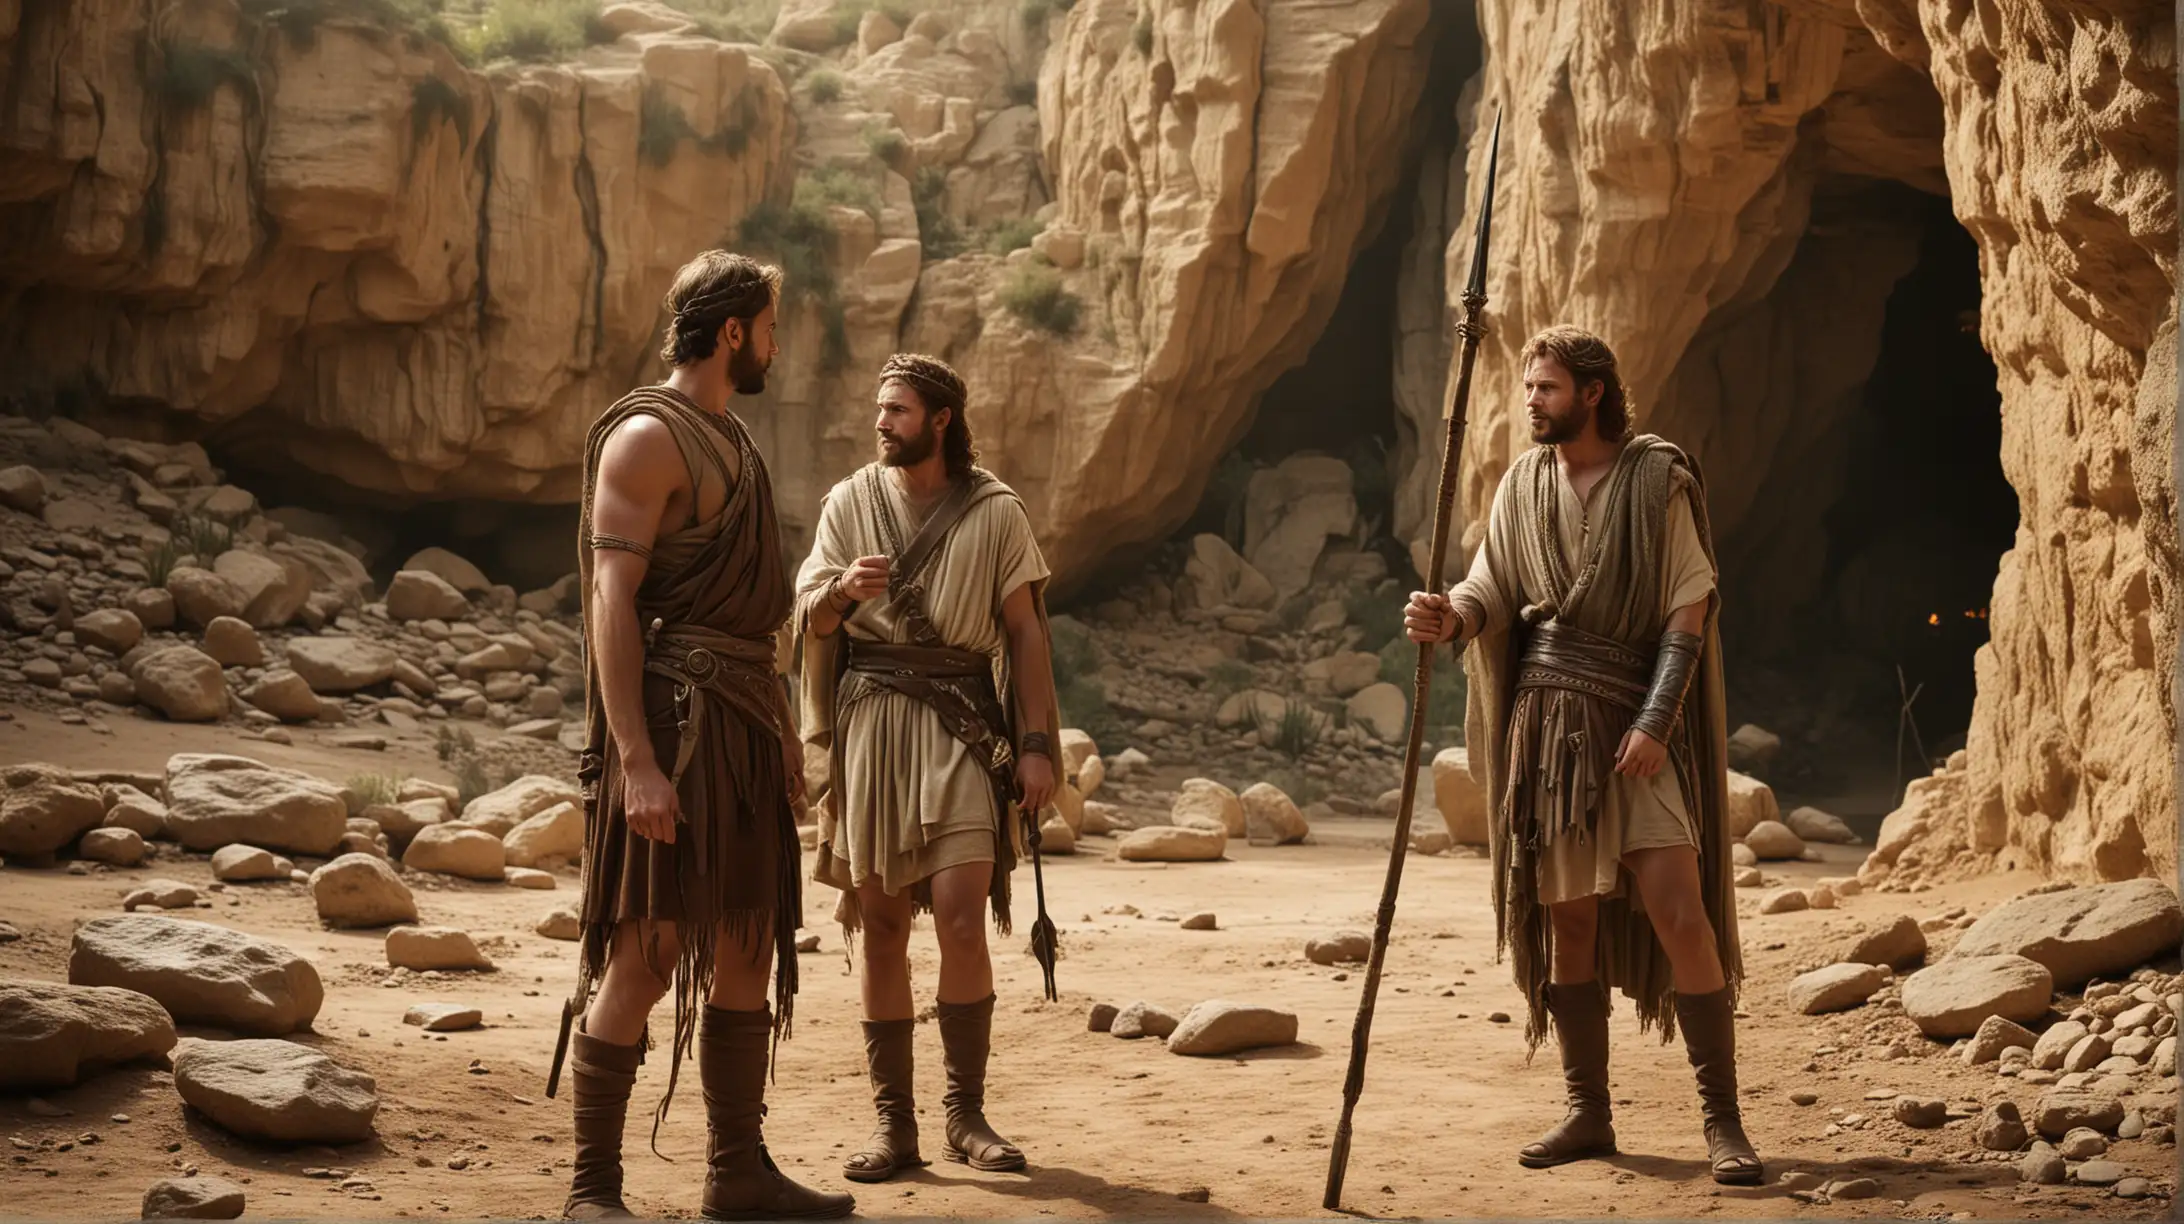 A handsome young King David meets the angry King Saul outside a Cave. Saul is holding a spear. Set during the Biblical Era of King David